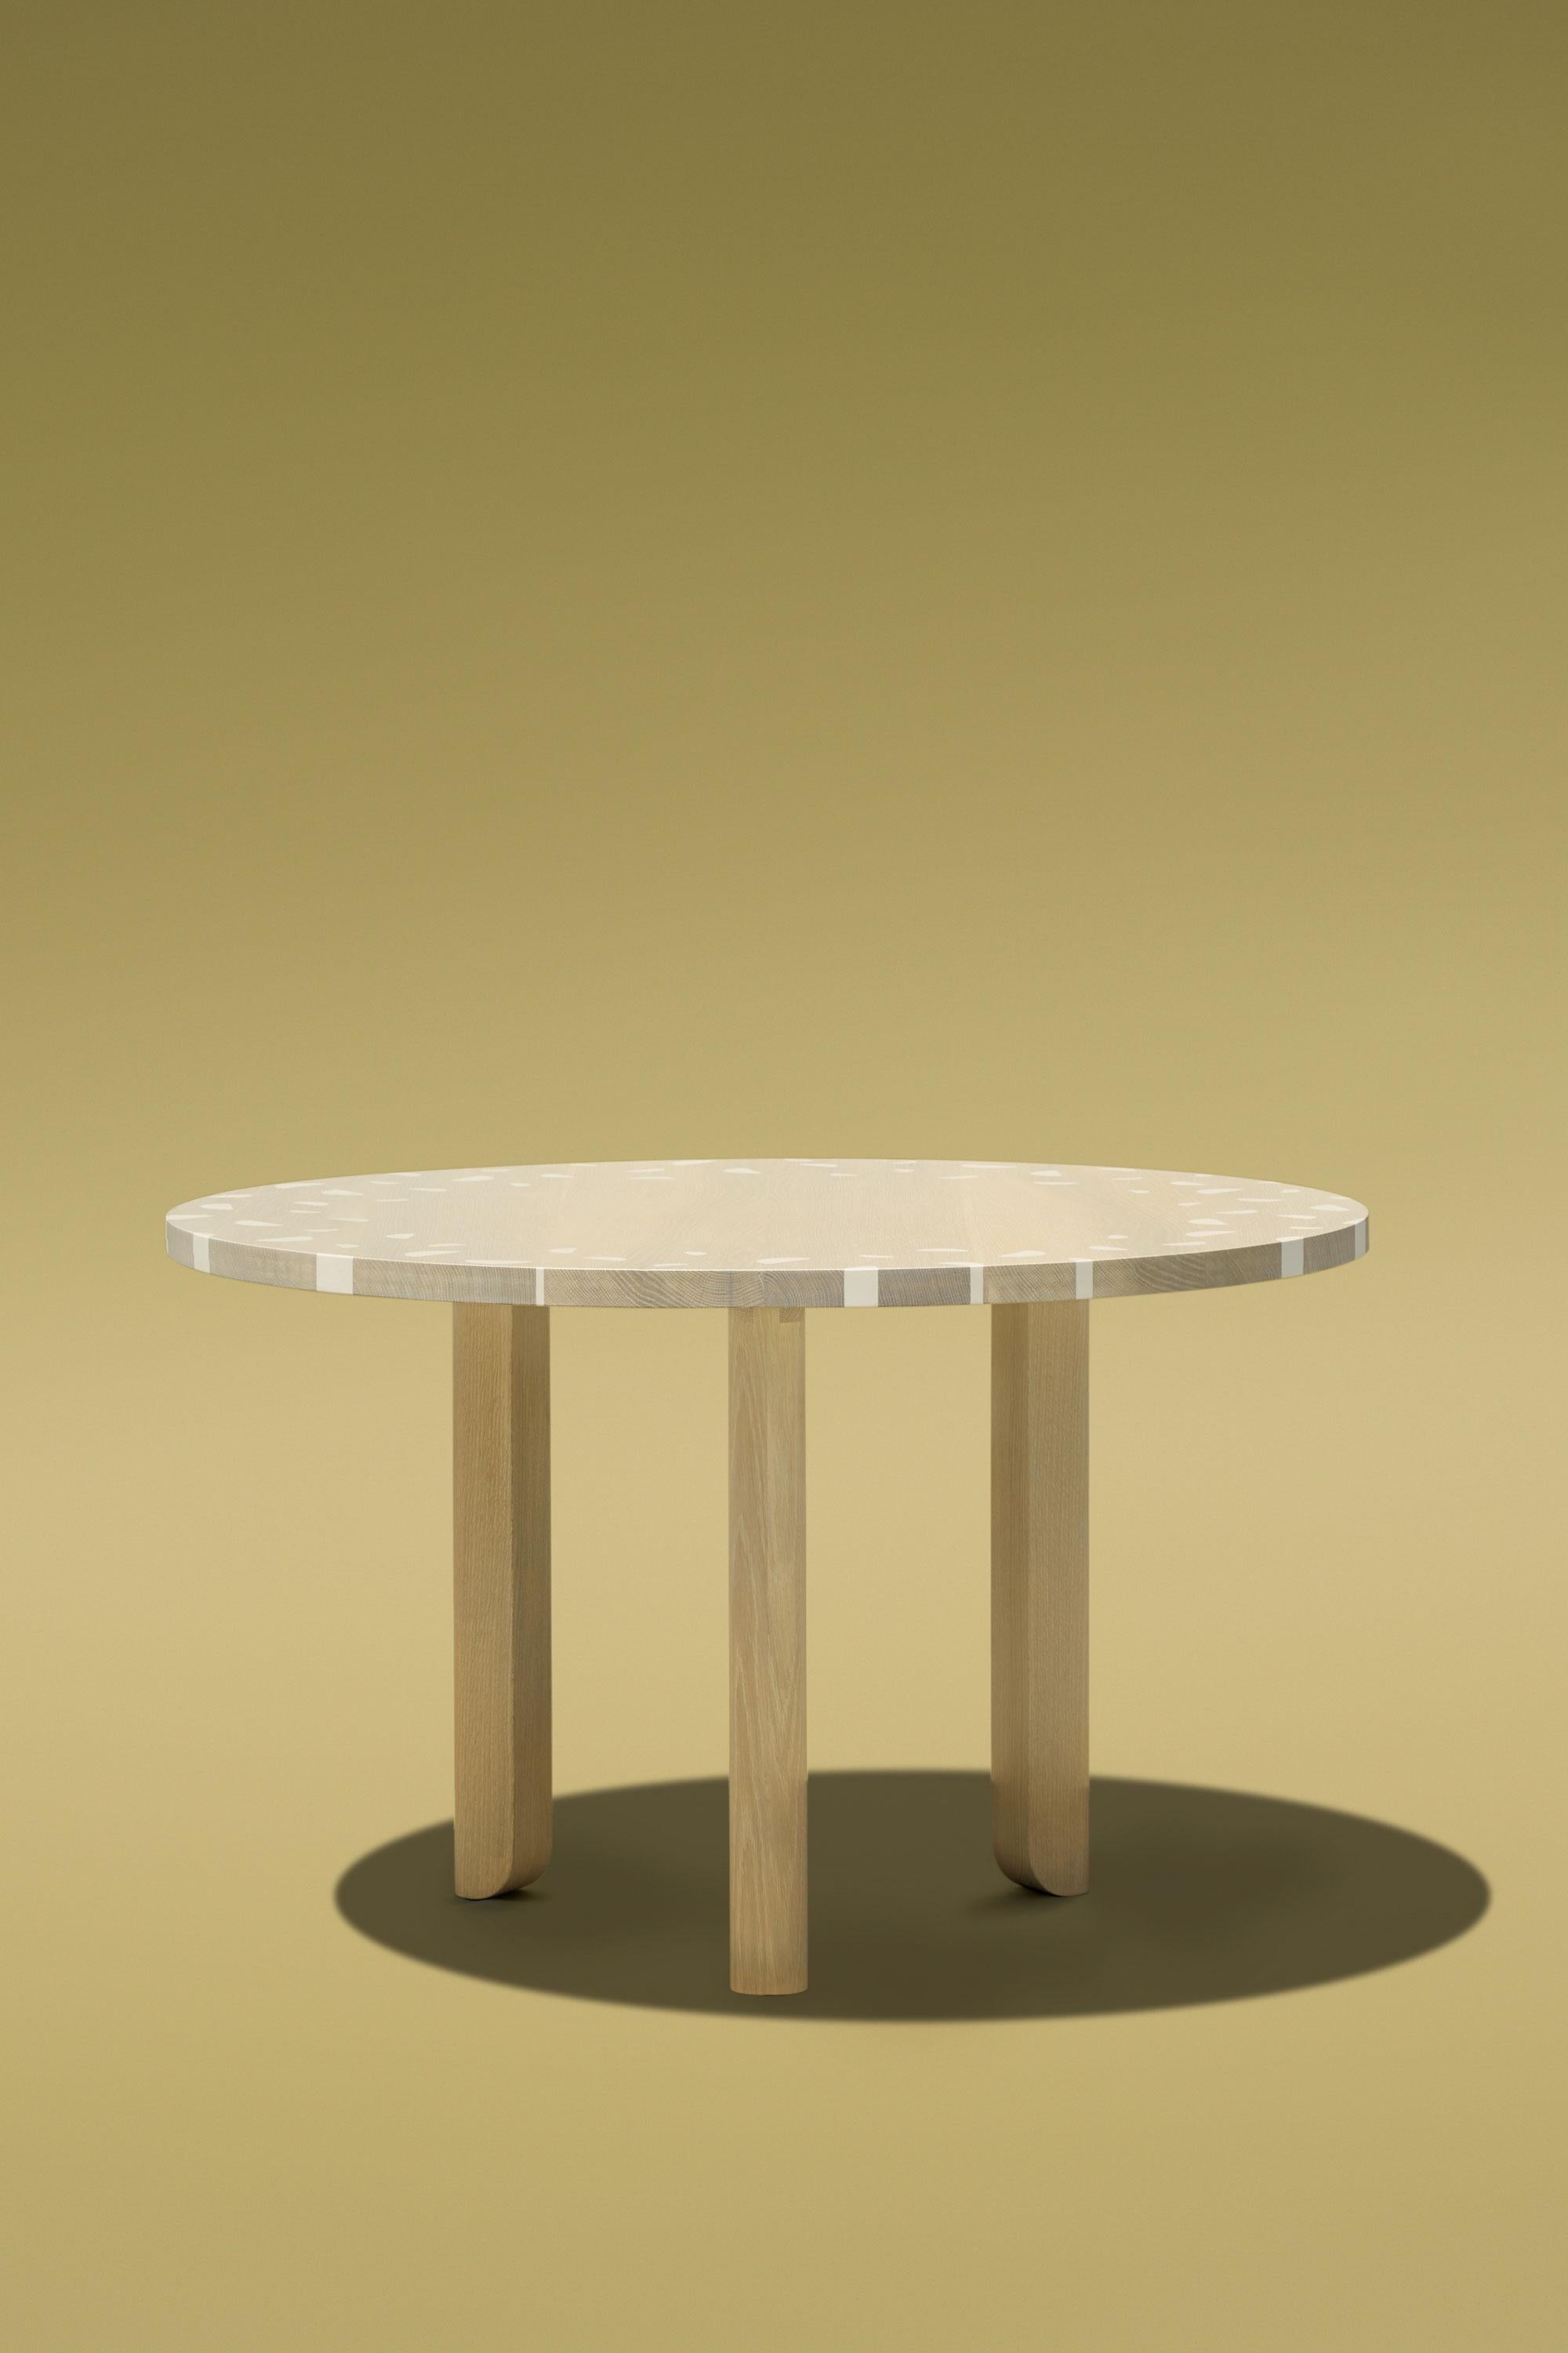 American Contemporary Bleached White Oak / Epoxy-Inlay Dining Table - HACHIGRAM Table For Sale